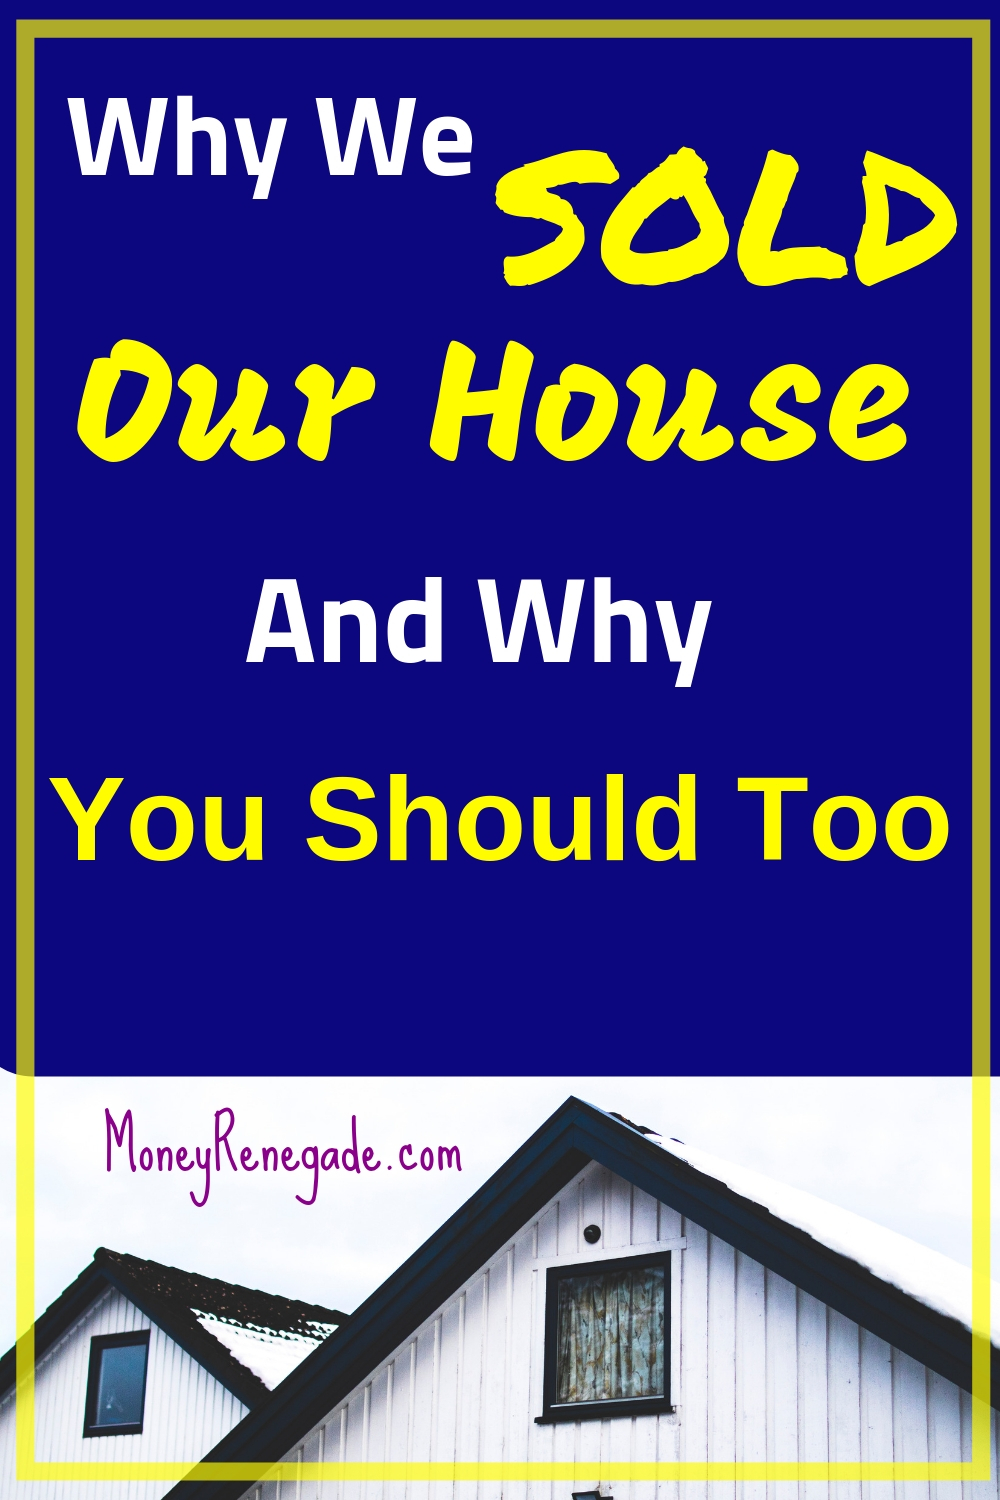 Why we are selling our house and you should too